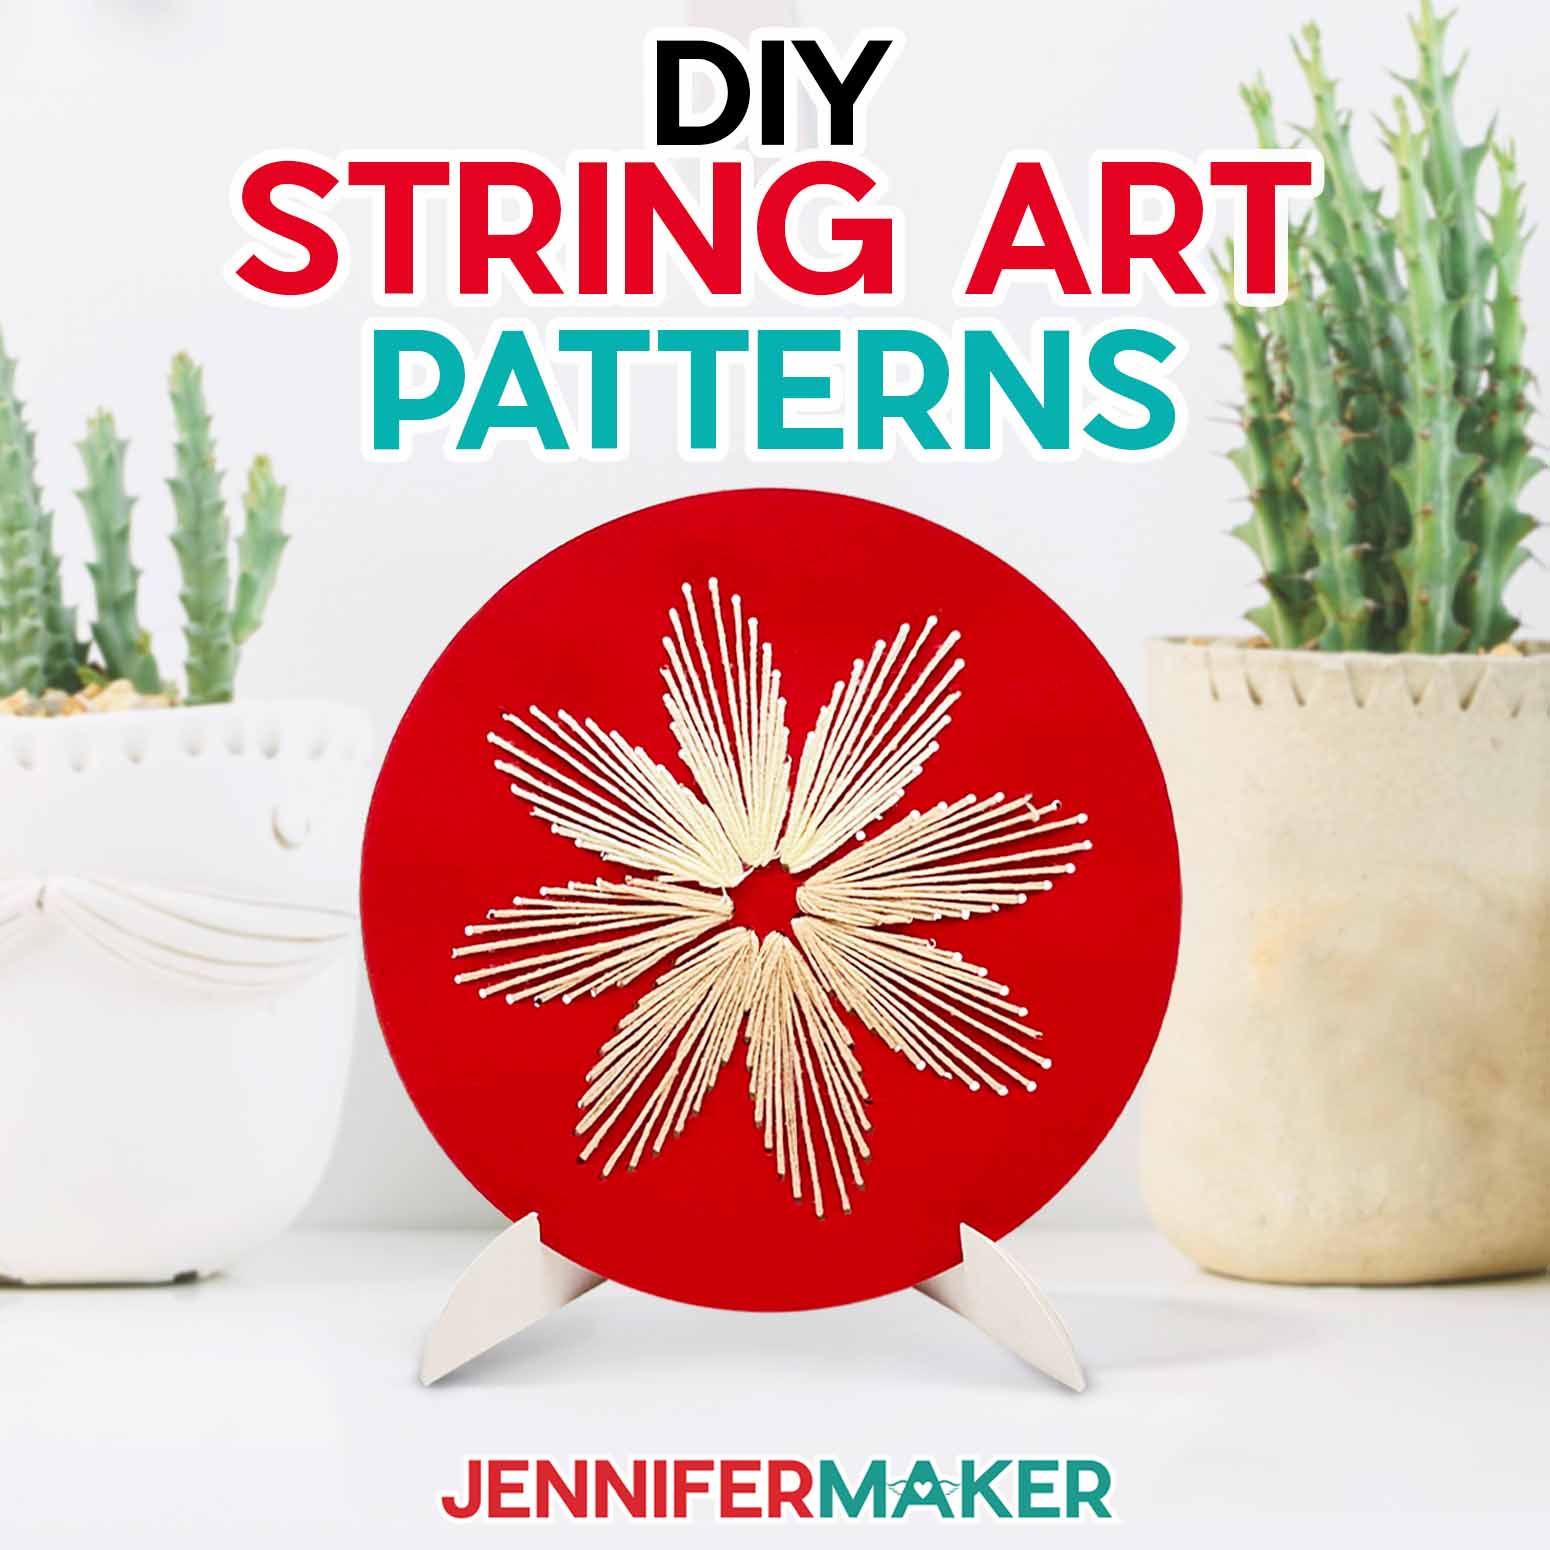 String Art Patterns For Beginners – No Nails Needed!